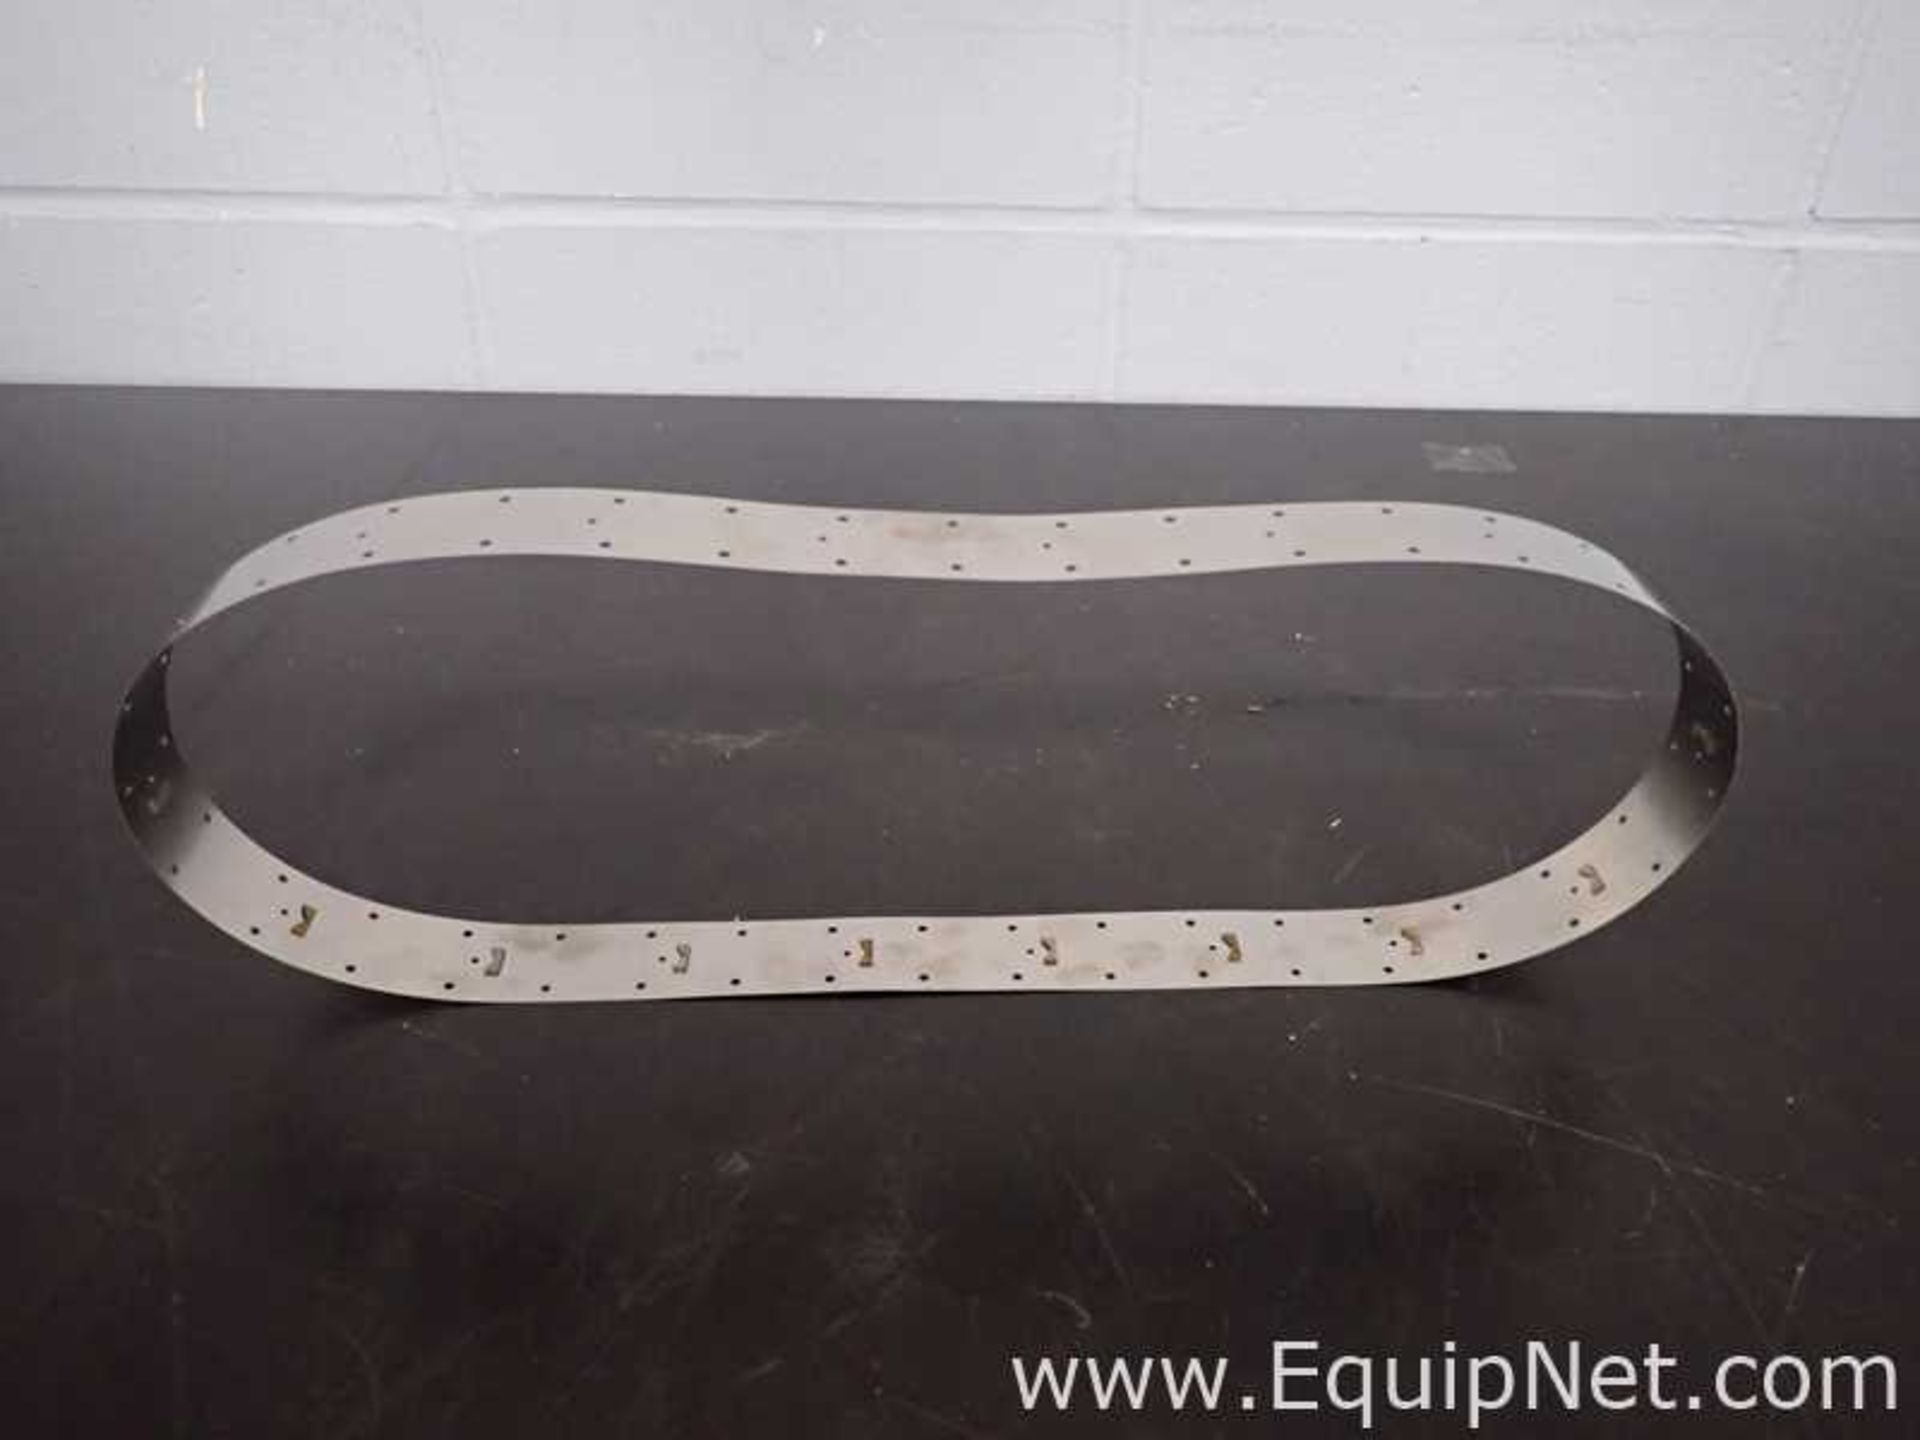 EQUIPNET LISTING #827045; REMOVAL COST: $20; DESCRIPTION: Lot of 43 Stoipper 13mm Delivery Belts